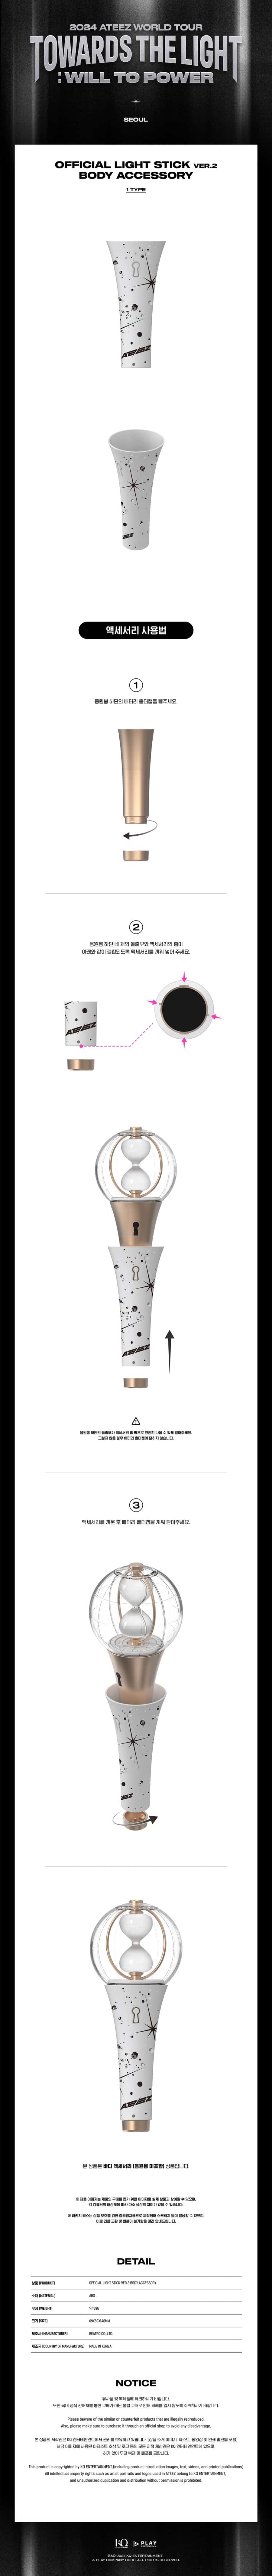 ATEEZ TOWARDS THE LIGHT : WILL TO POWER Lightstick Body Accessory